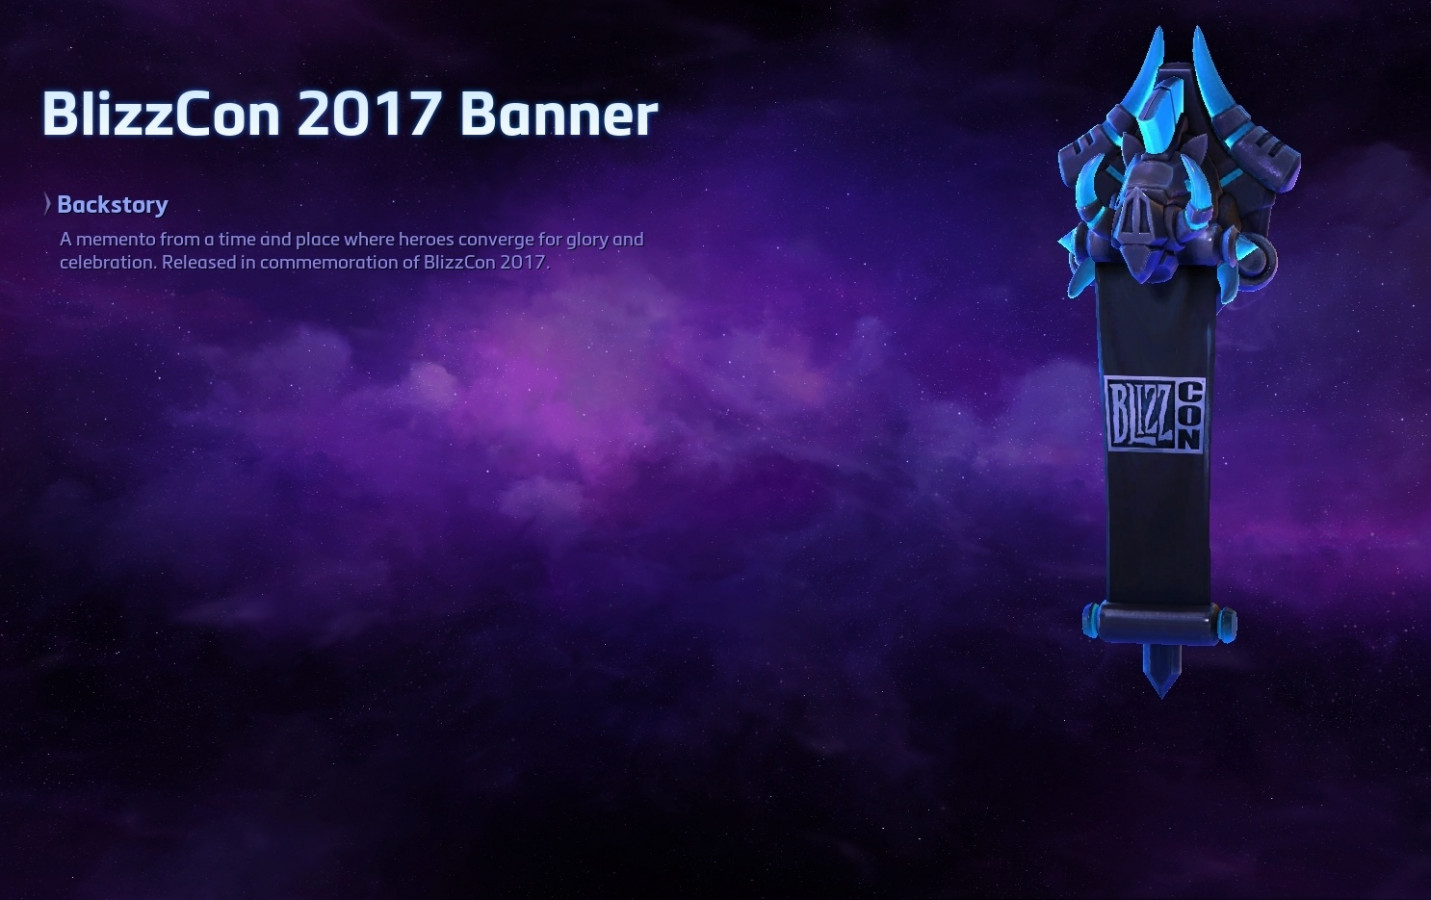 Heroes of the Storm Giving Away Characters, Overwatch Rewards for